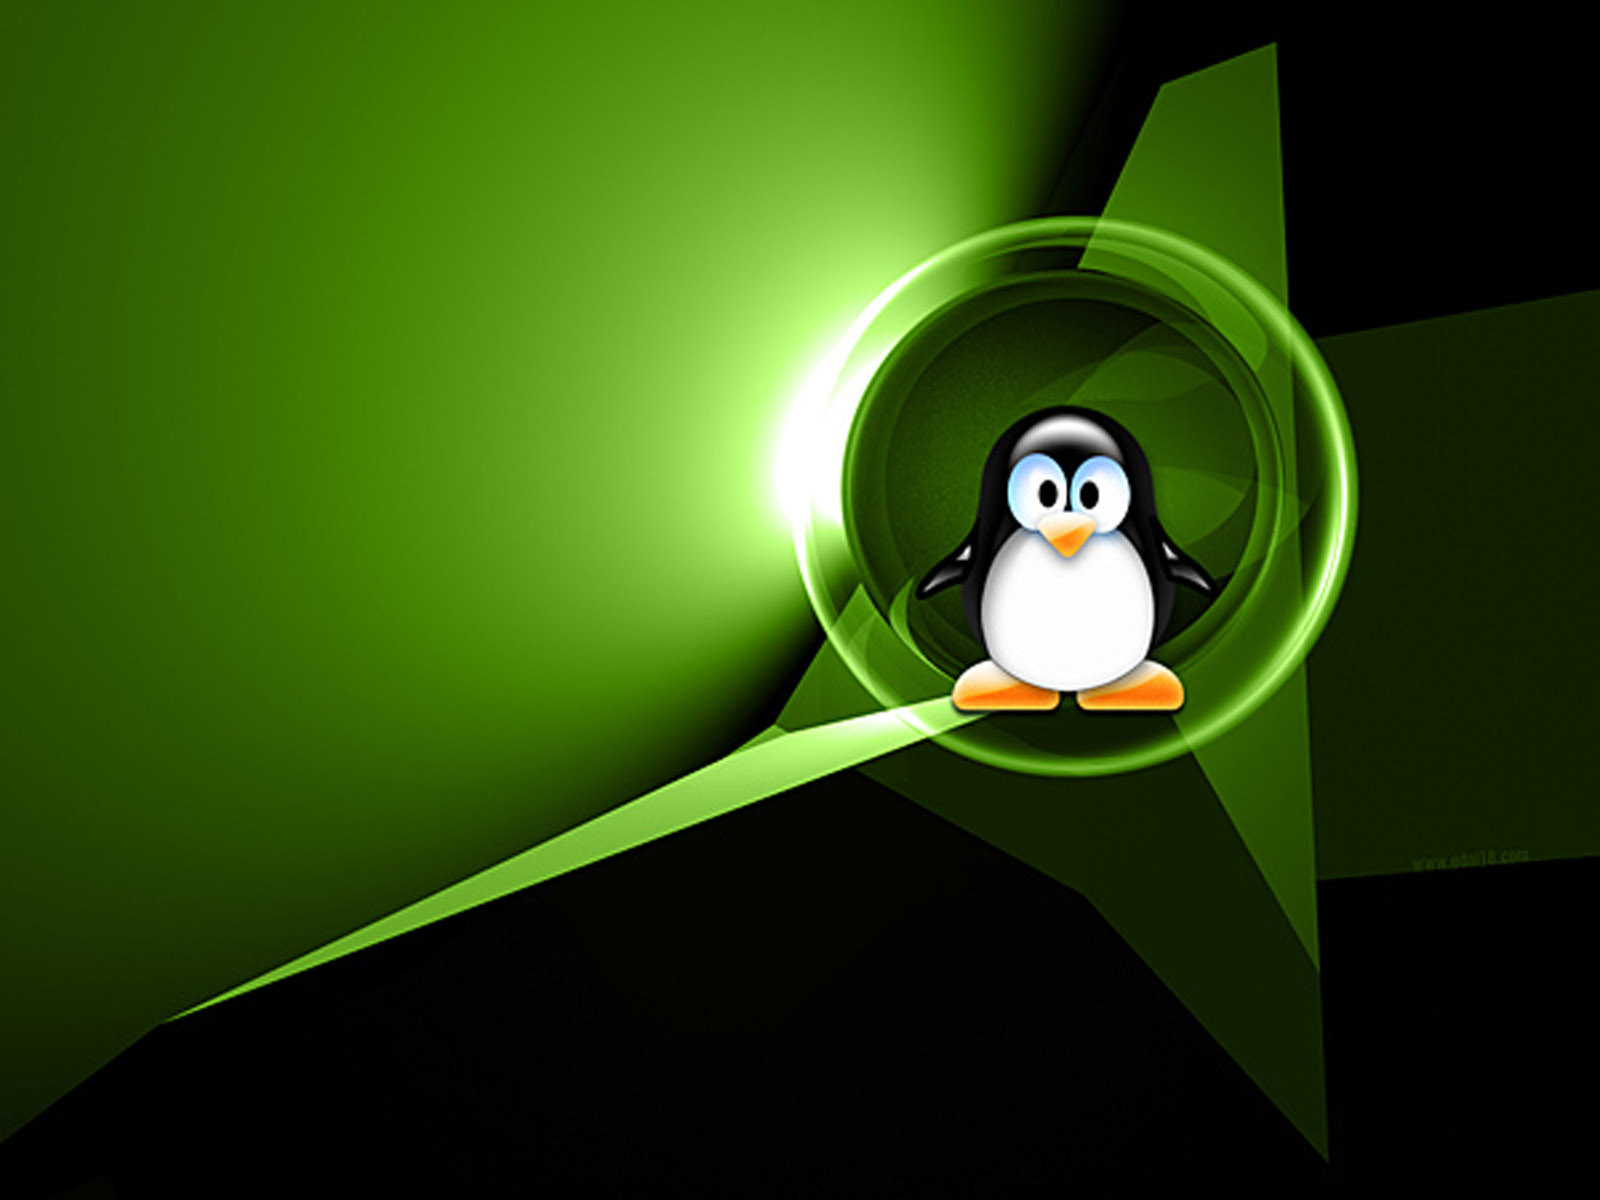 Background Wallpaper Linux Themes High Quality